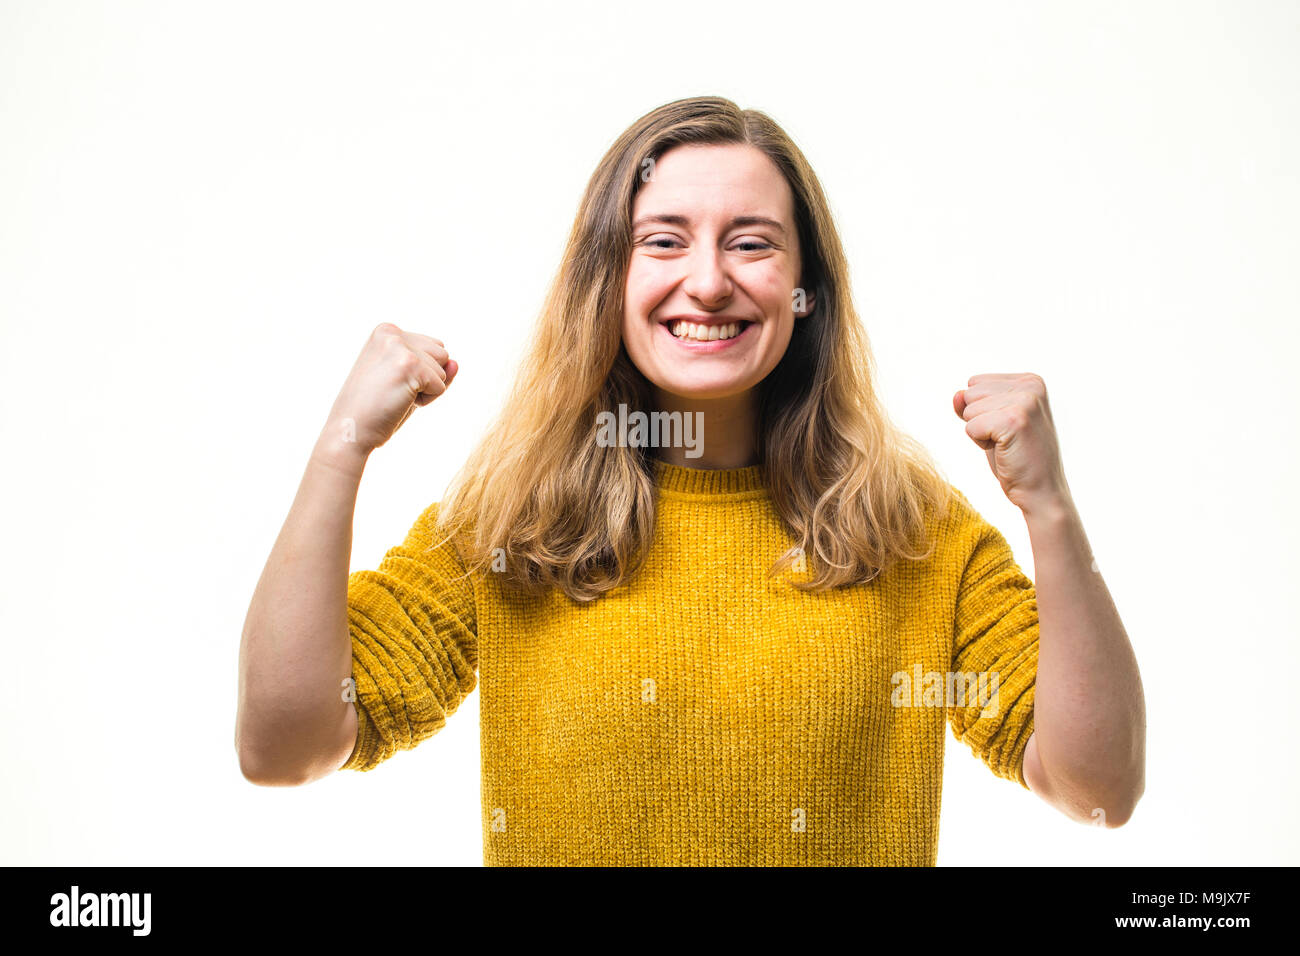 Celebrating success - A happy smiling positive enthusiastic  young Caucasian woman girl , pumping her fists in exuberance, full of passion and committment  - UK Stock Photo